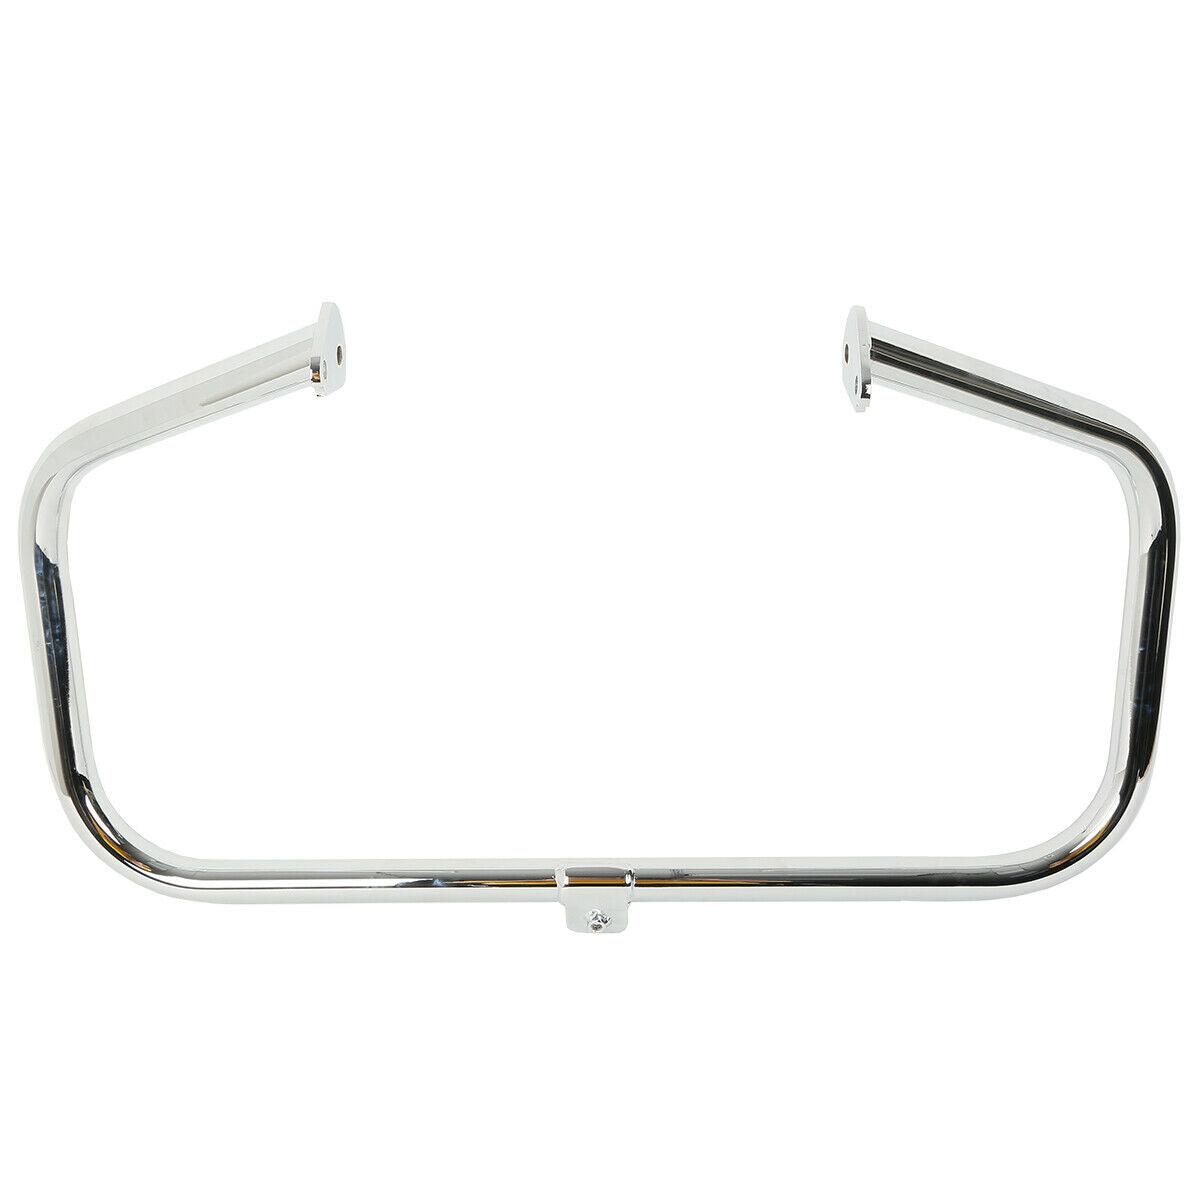 Engine Guard Highway Crash Bar Fit For Harley Touring 1997-2008 2007 2006 Chrome - Moto Life Products